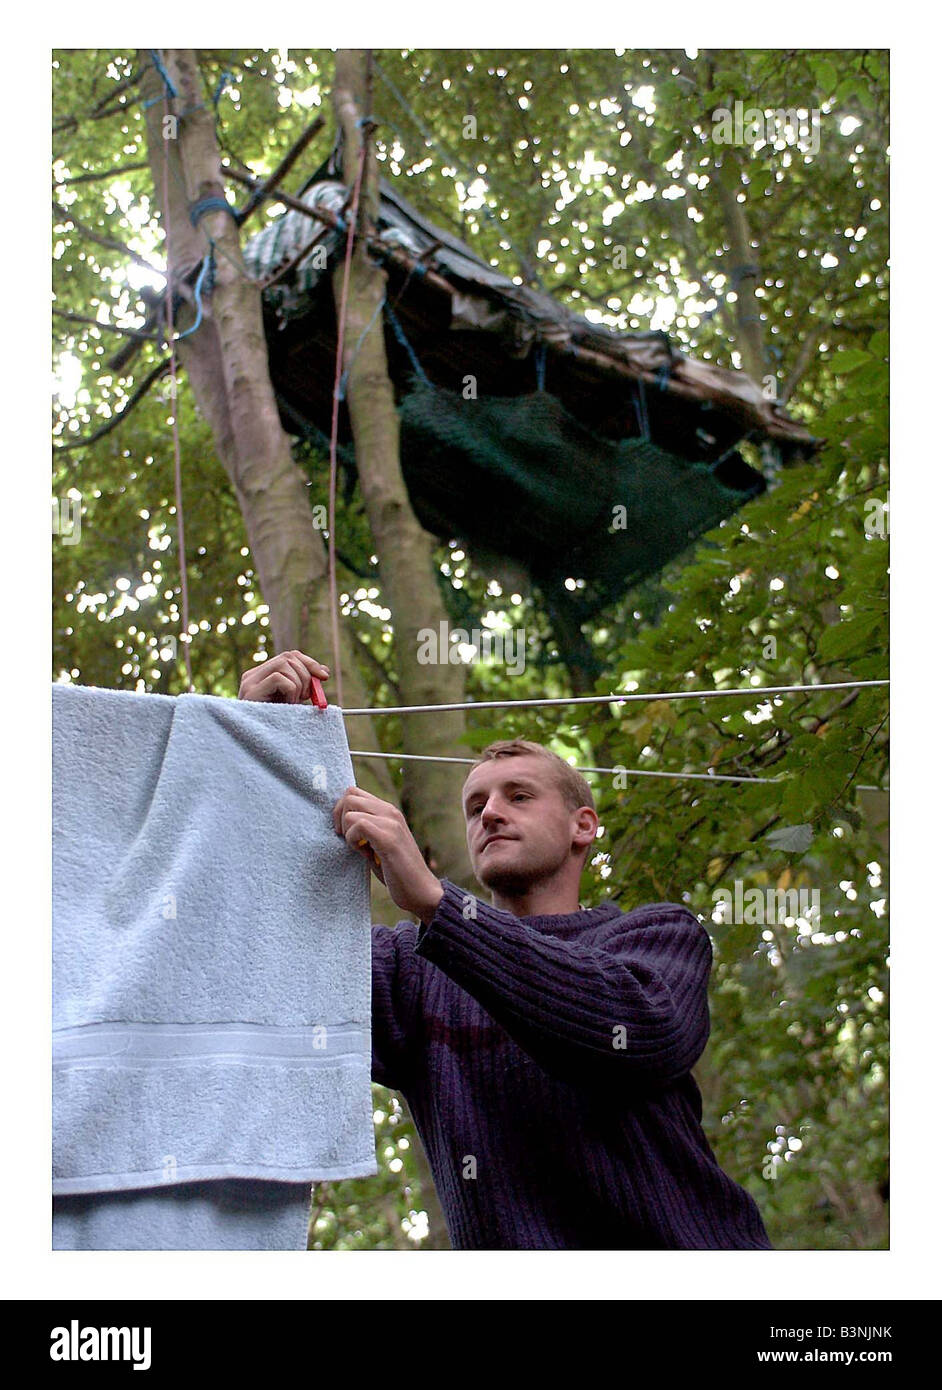 Bilston Glen Woodland Camp August 2005 feature on campdwellers staging a protest to block the constructioin of a new a701 by pass which would cut through Bilston Glen woodland Ewan shiny hangs his washing Stock Photo